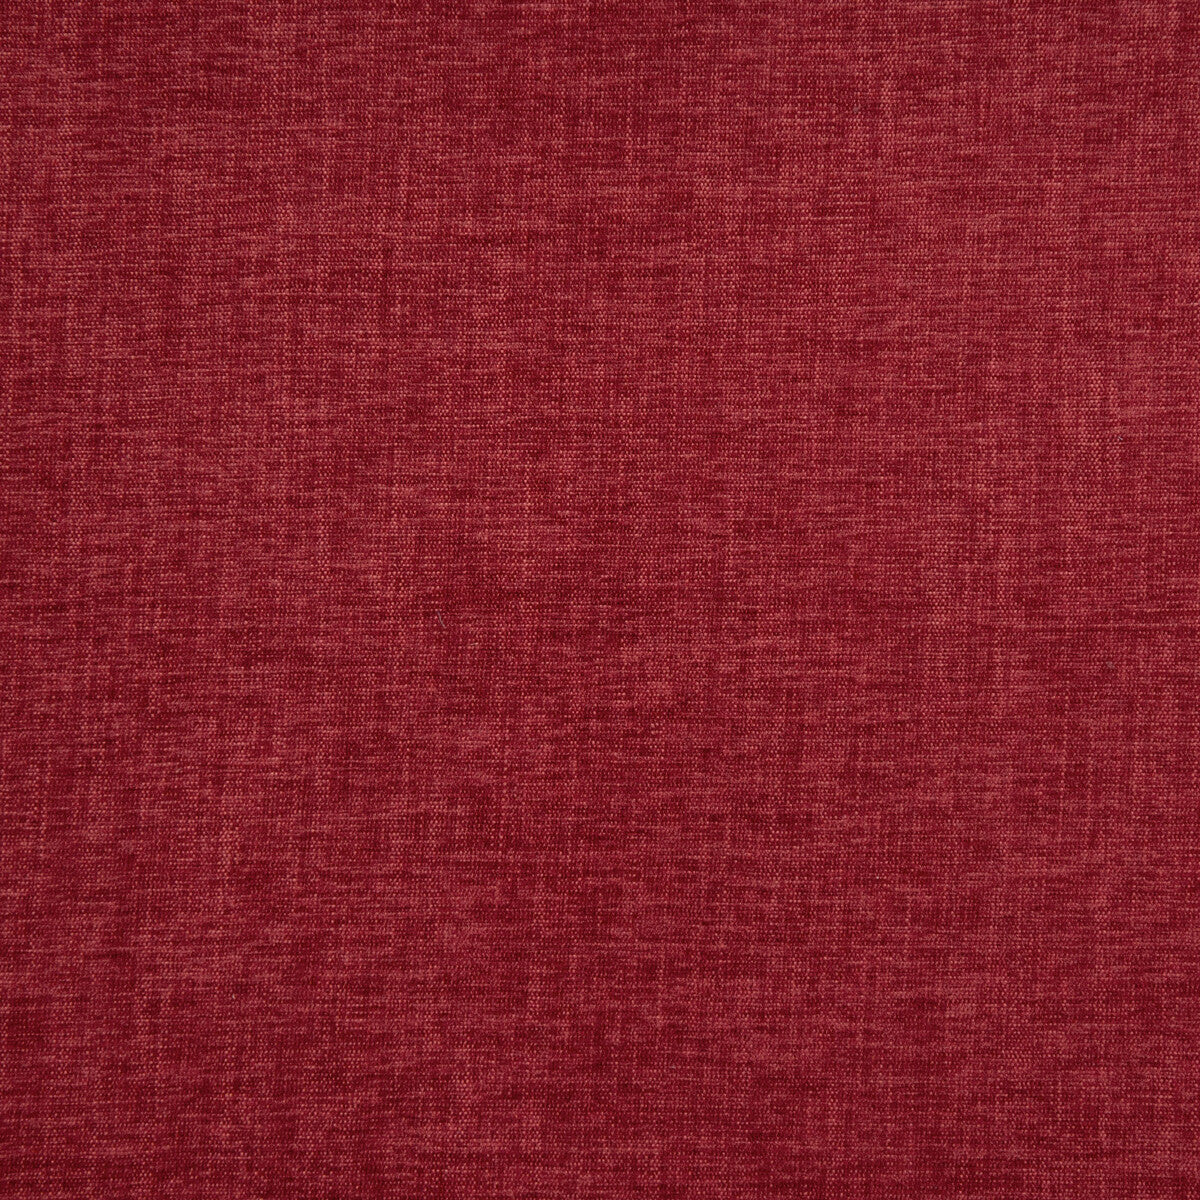 Moro fabric in rojo color - pattern GDT5670.023.0 - by Gaston y Daniela in the Gaston Maiorica collection